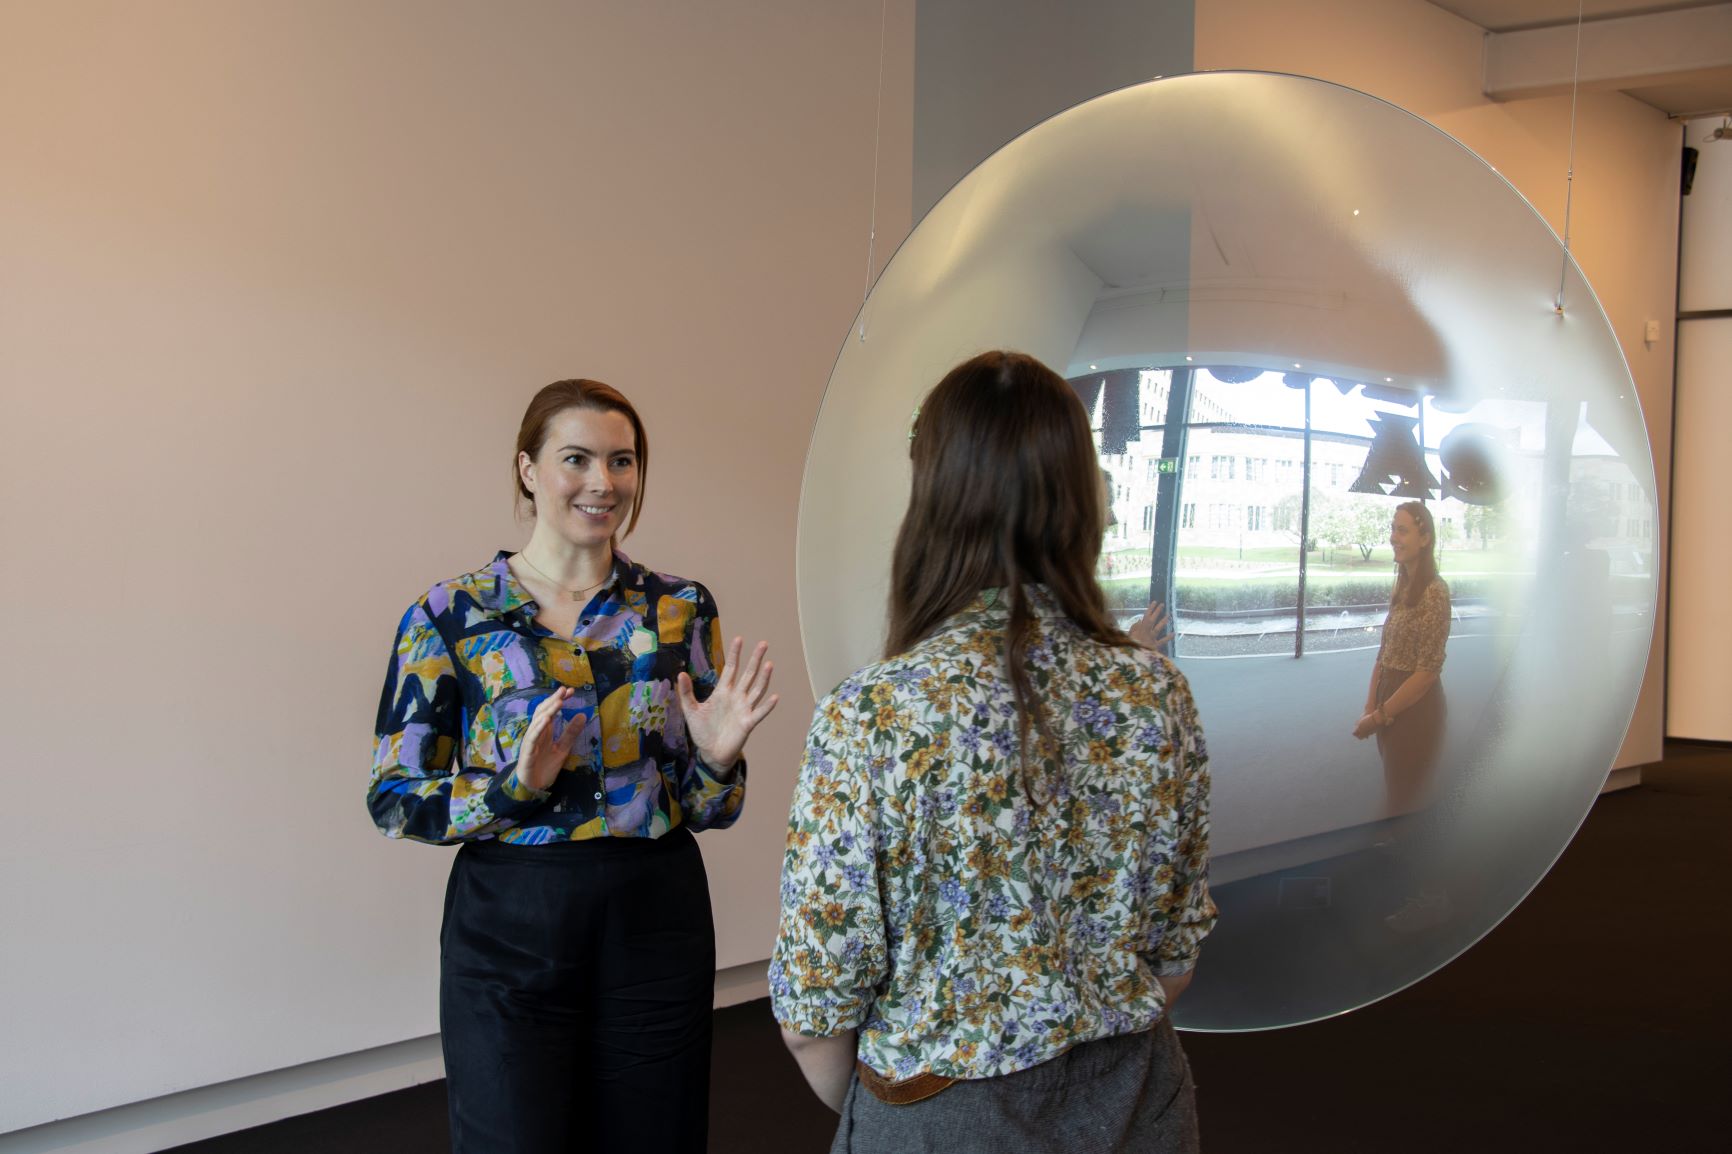 A mediator talking to a visitor in front of an artwork